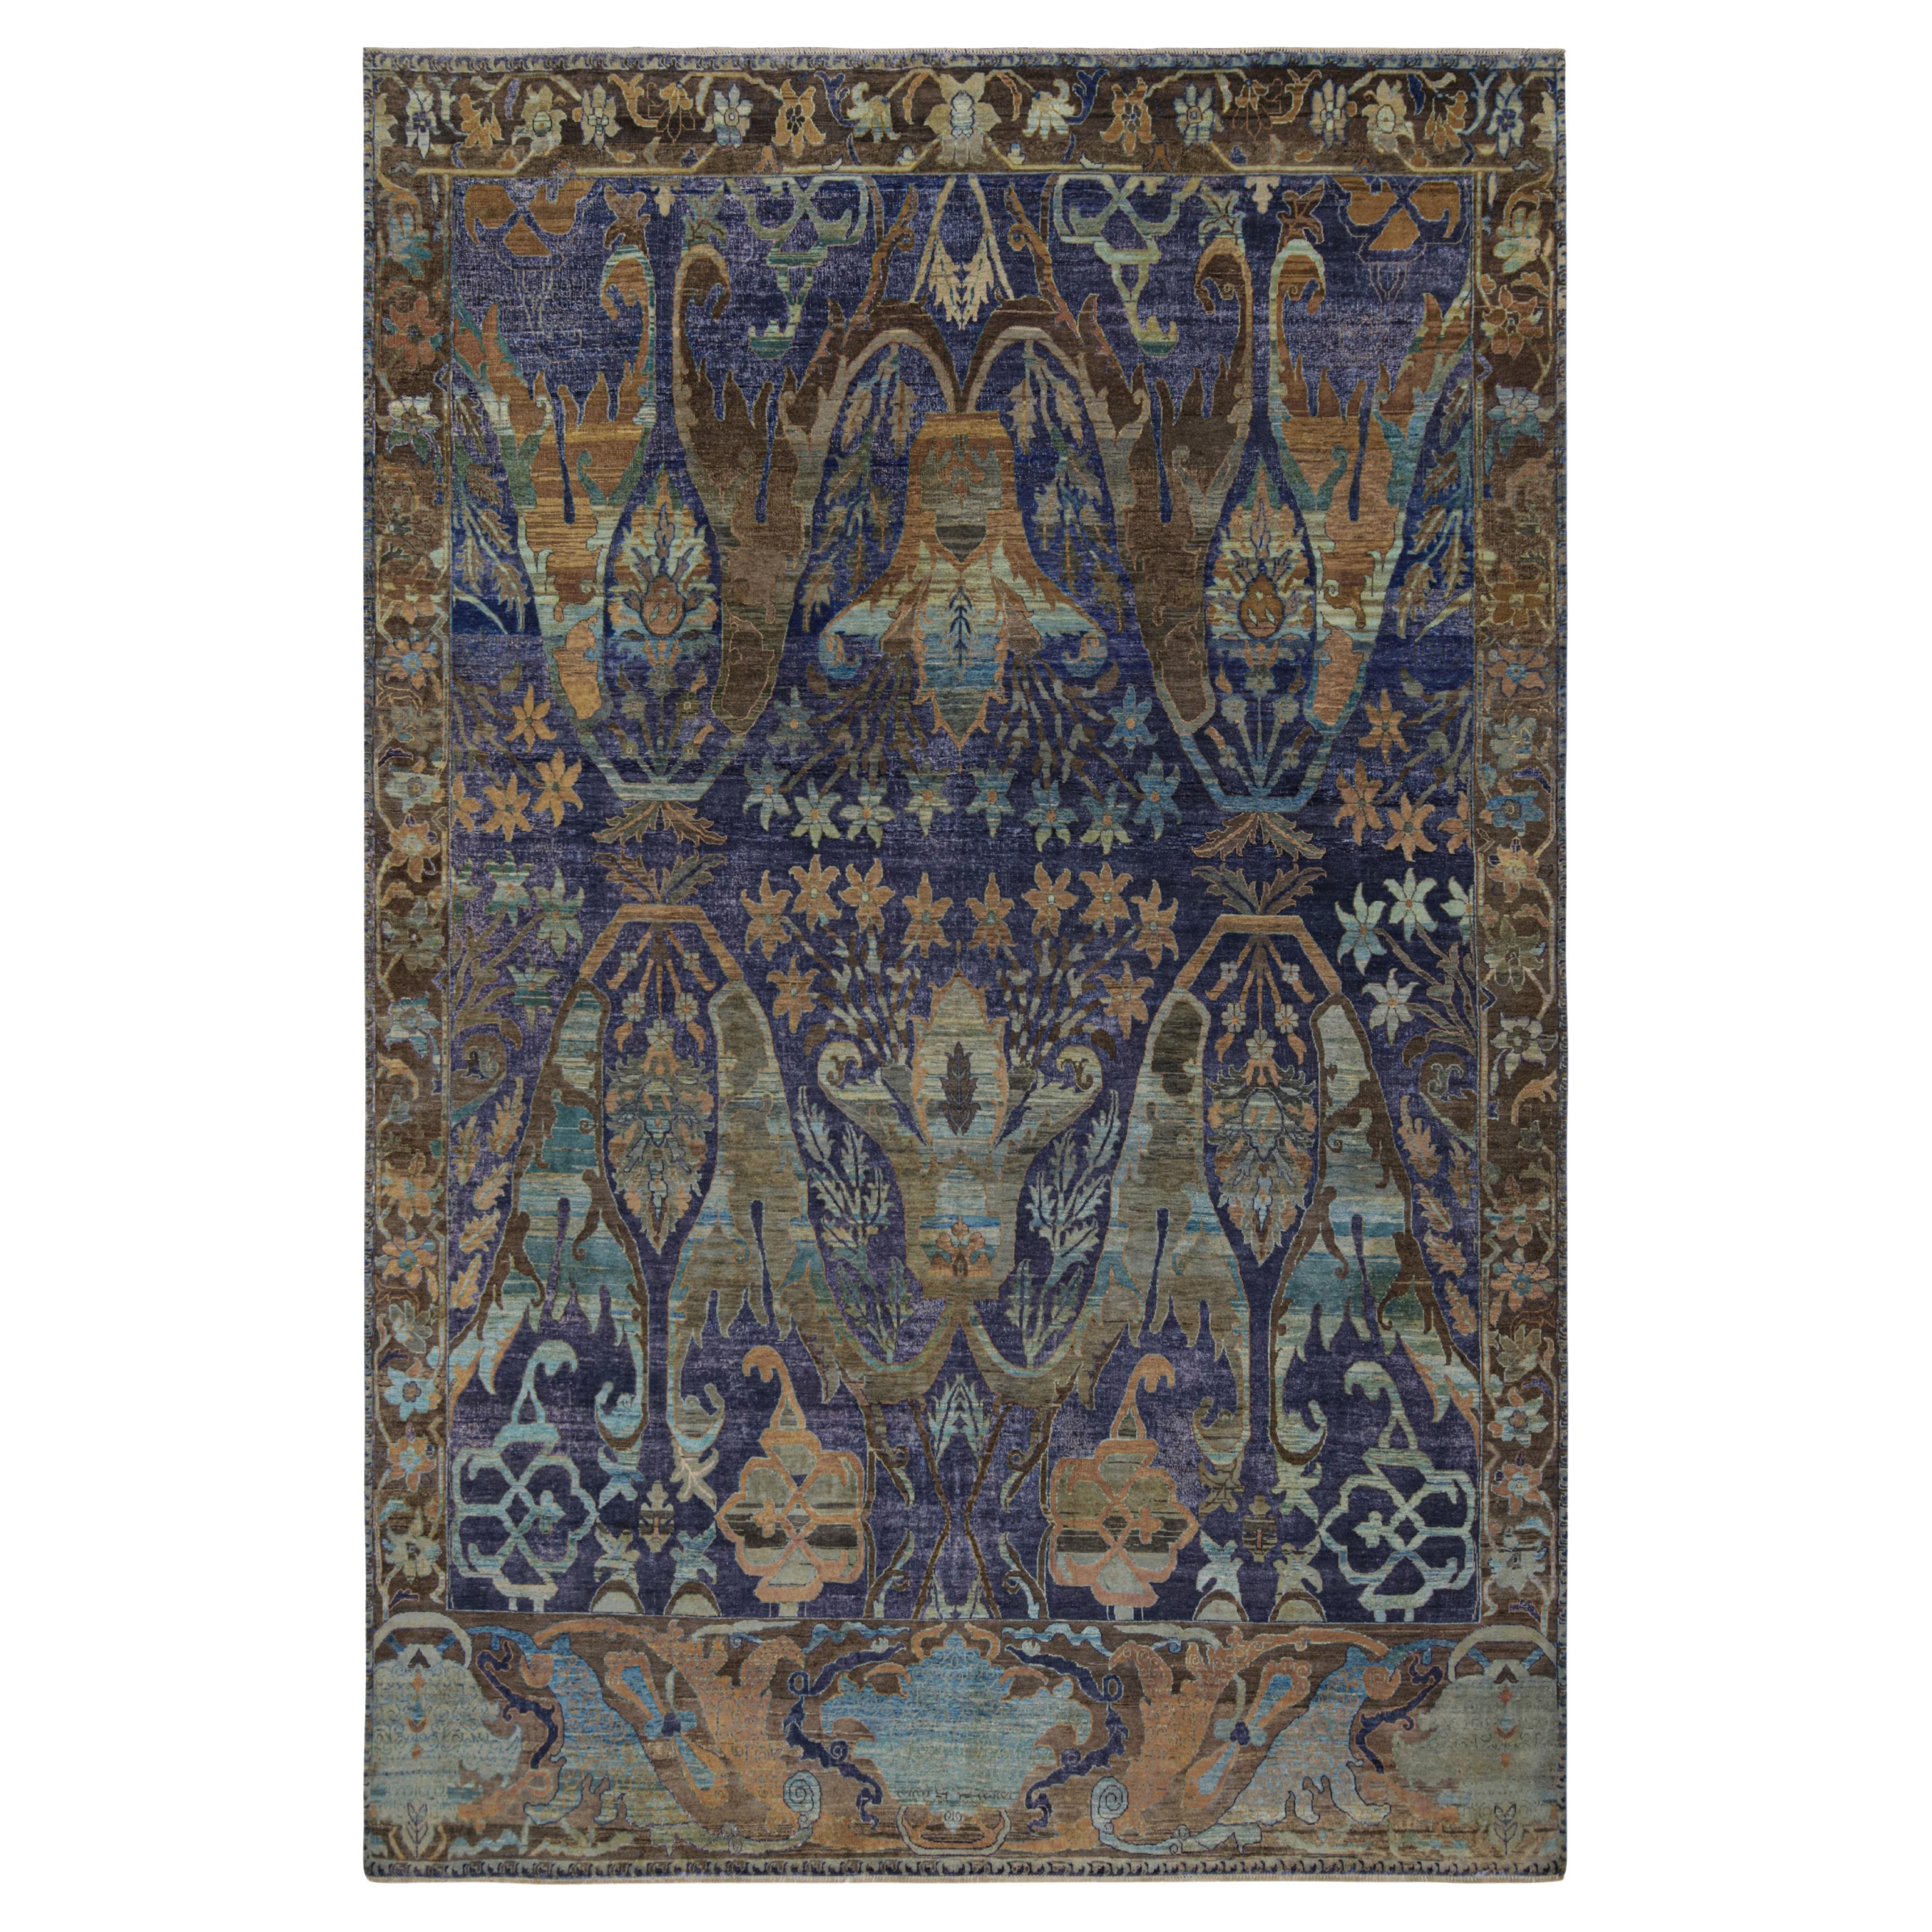 Rug & Kilim’s Oushak-Style Rug in Indigo, Brown and Brown Floral Patterns